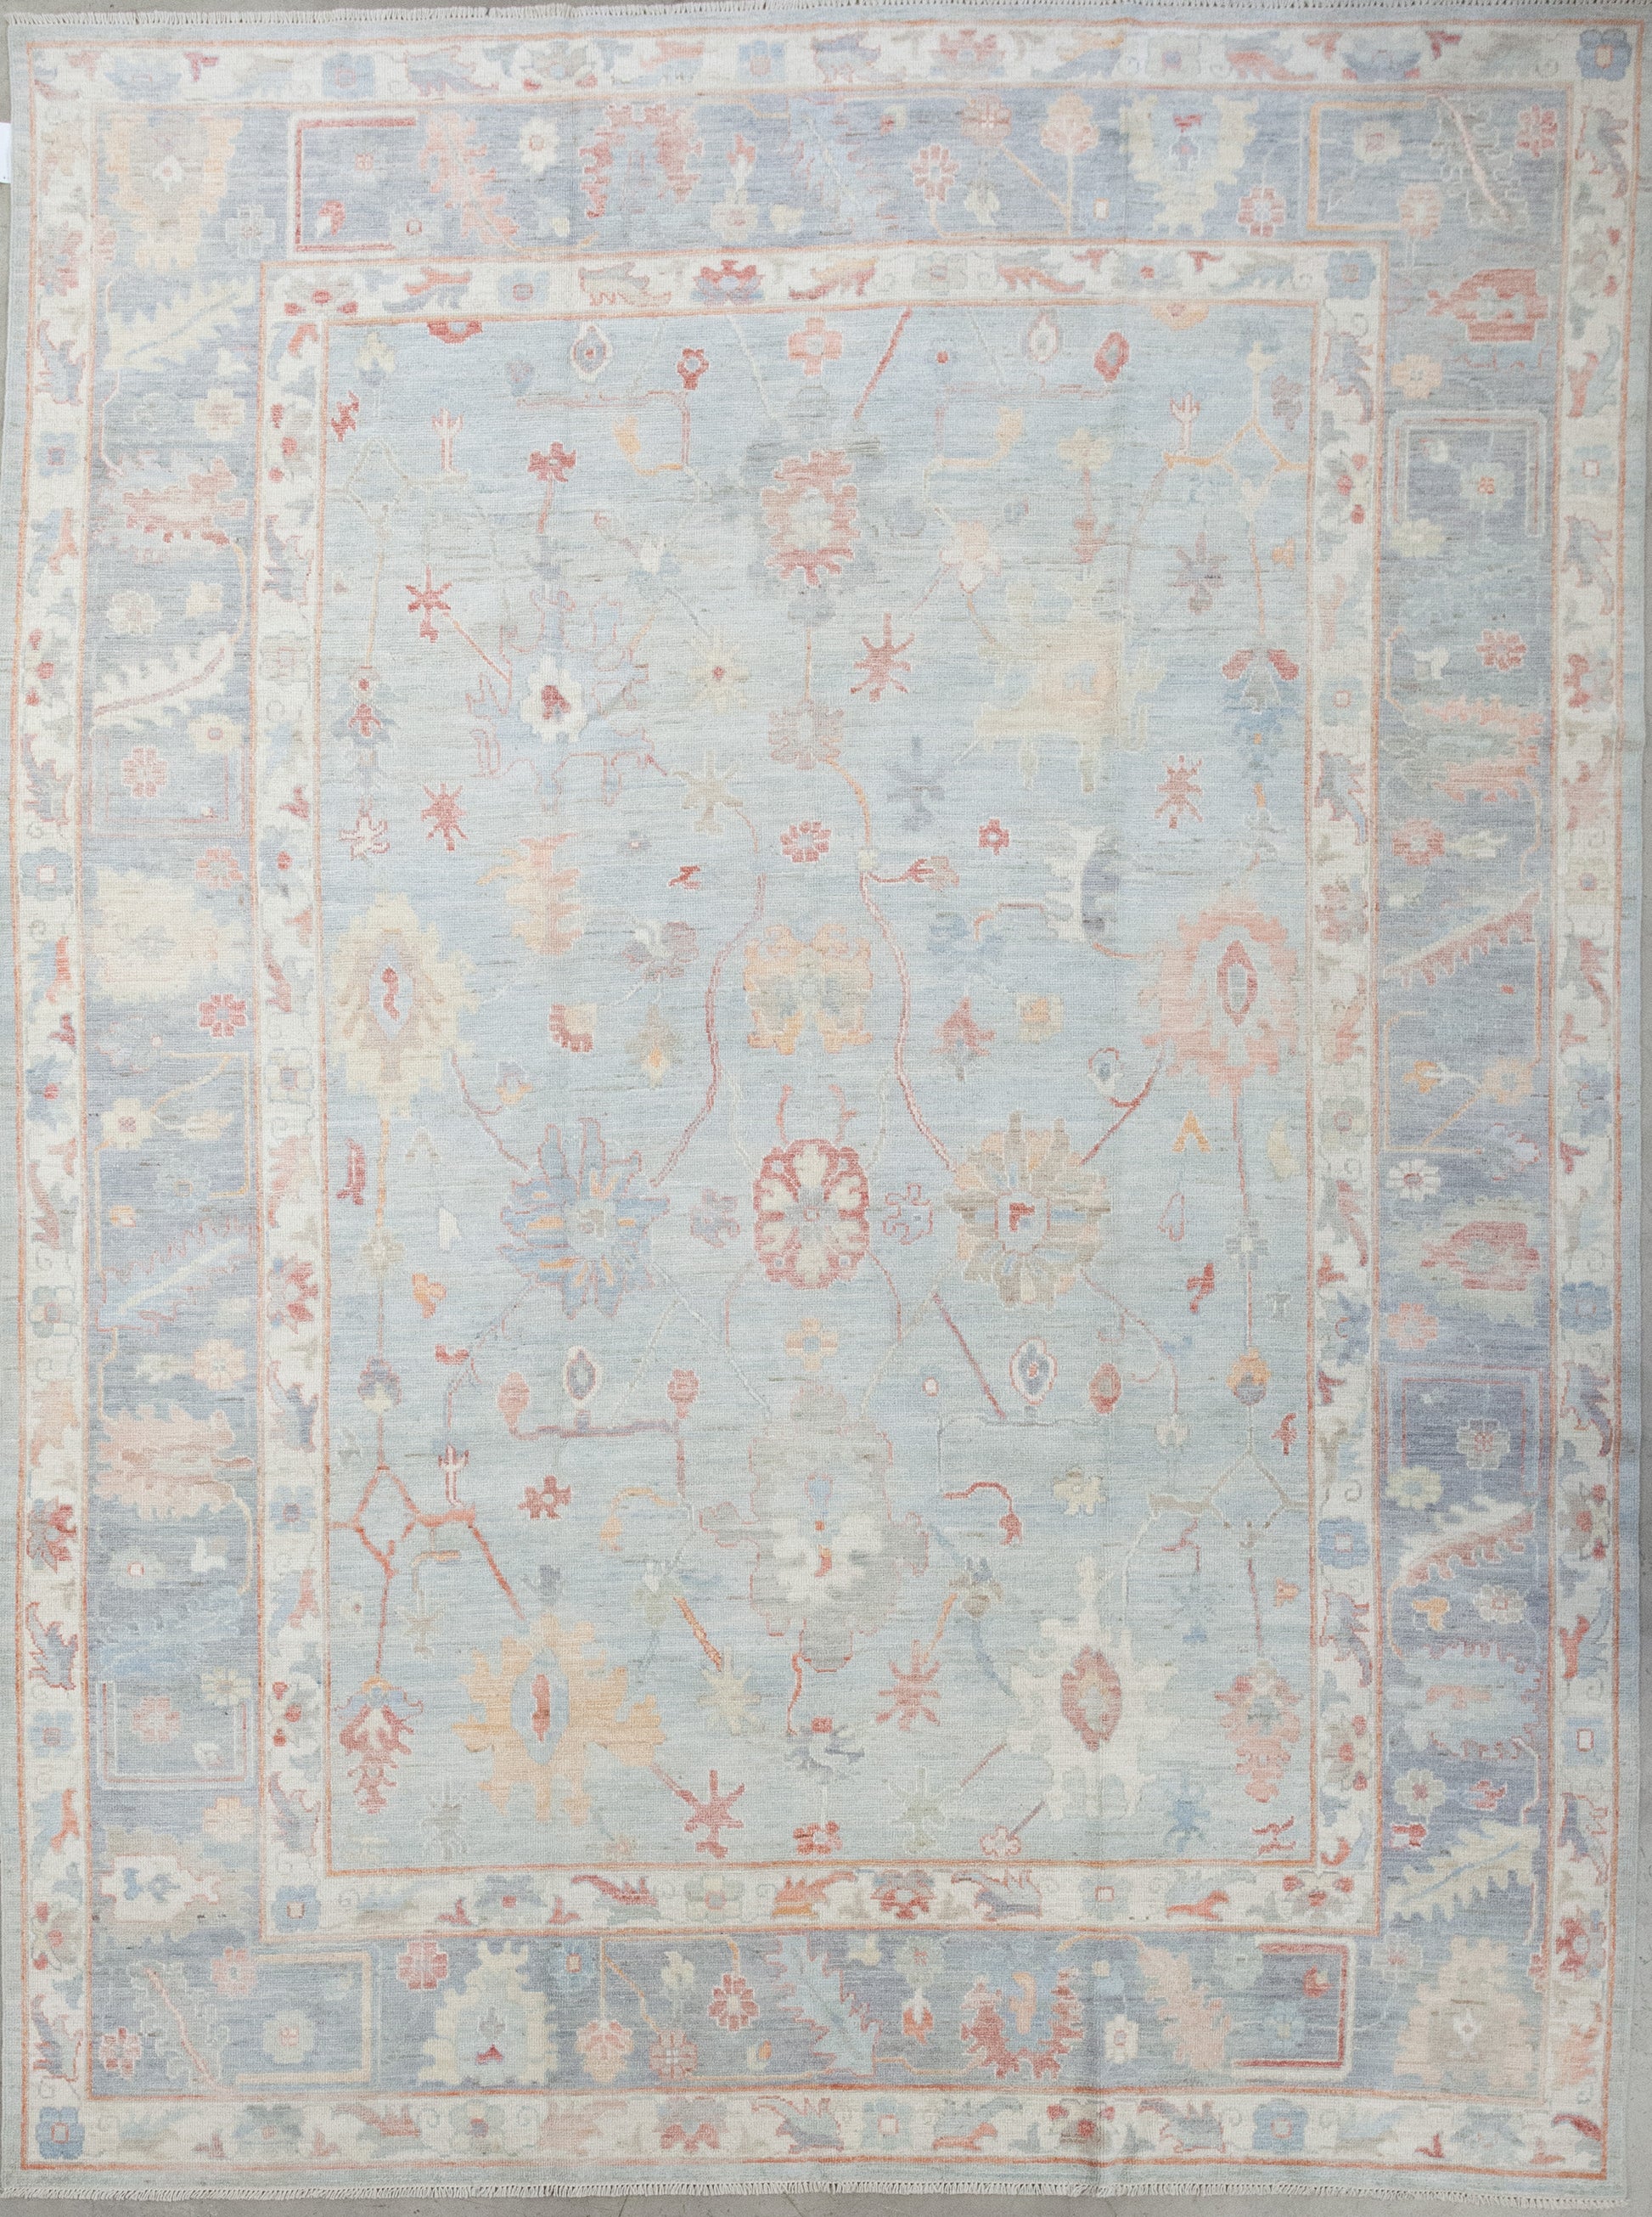 The elegant rug was woven in a simple color scheme that has variations of blue as the main hue with red, yellow and green accents. The design features an abstraction of sunflowers, white jasmine, and other types of flowers. 